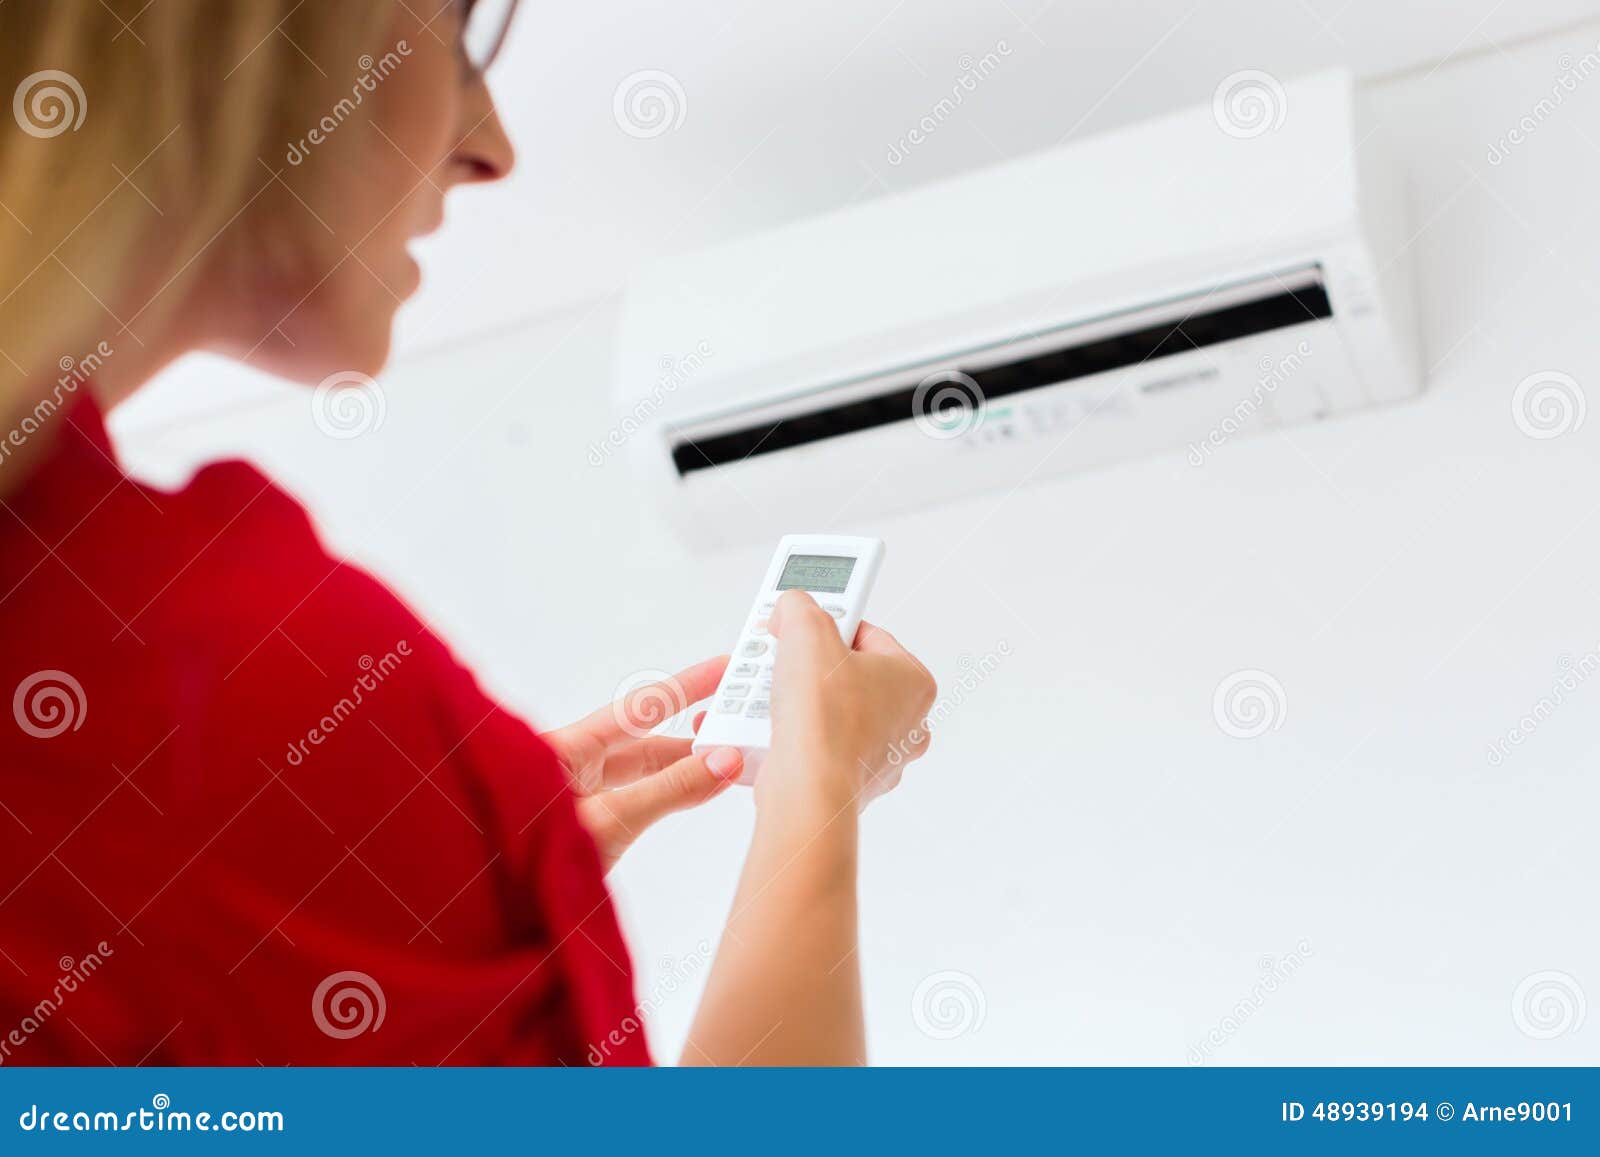 woman using air-condition